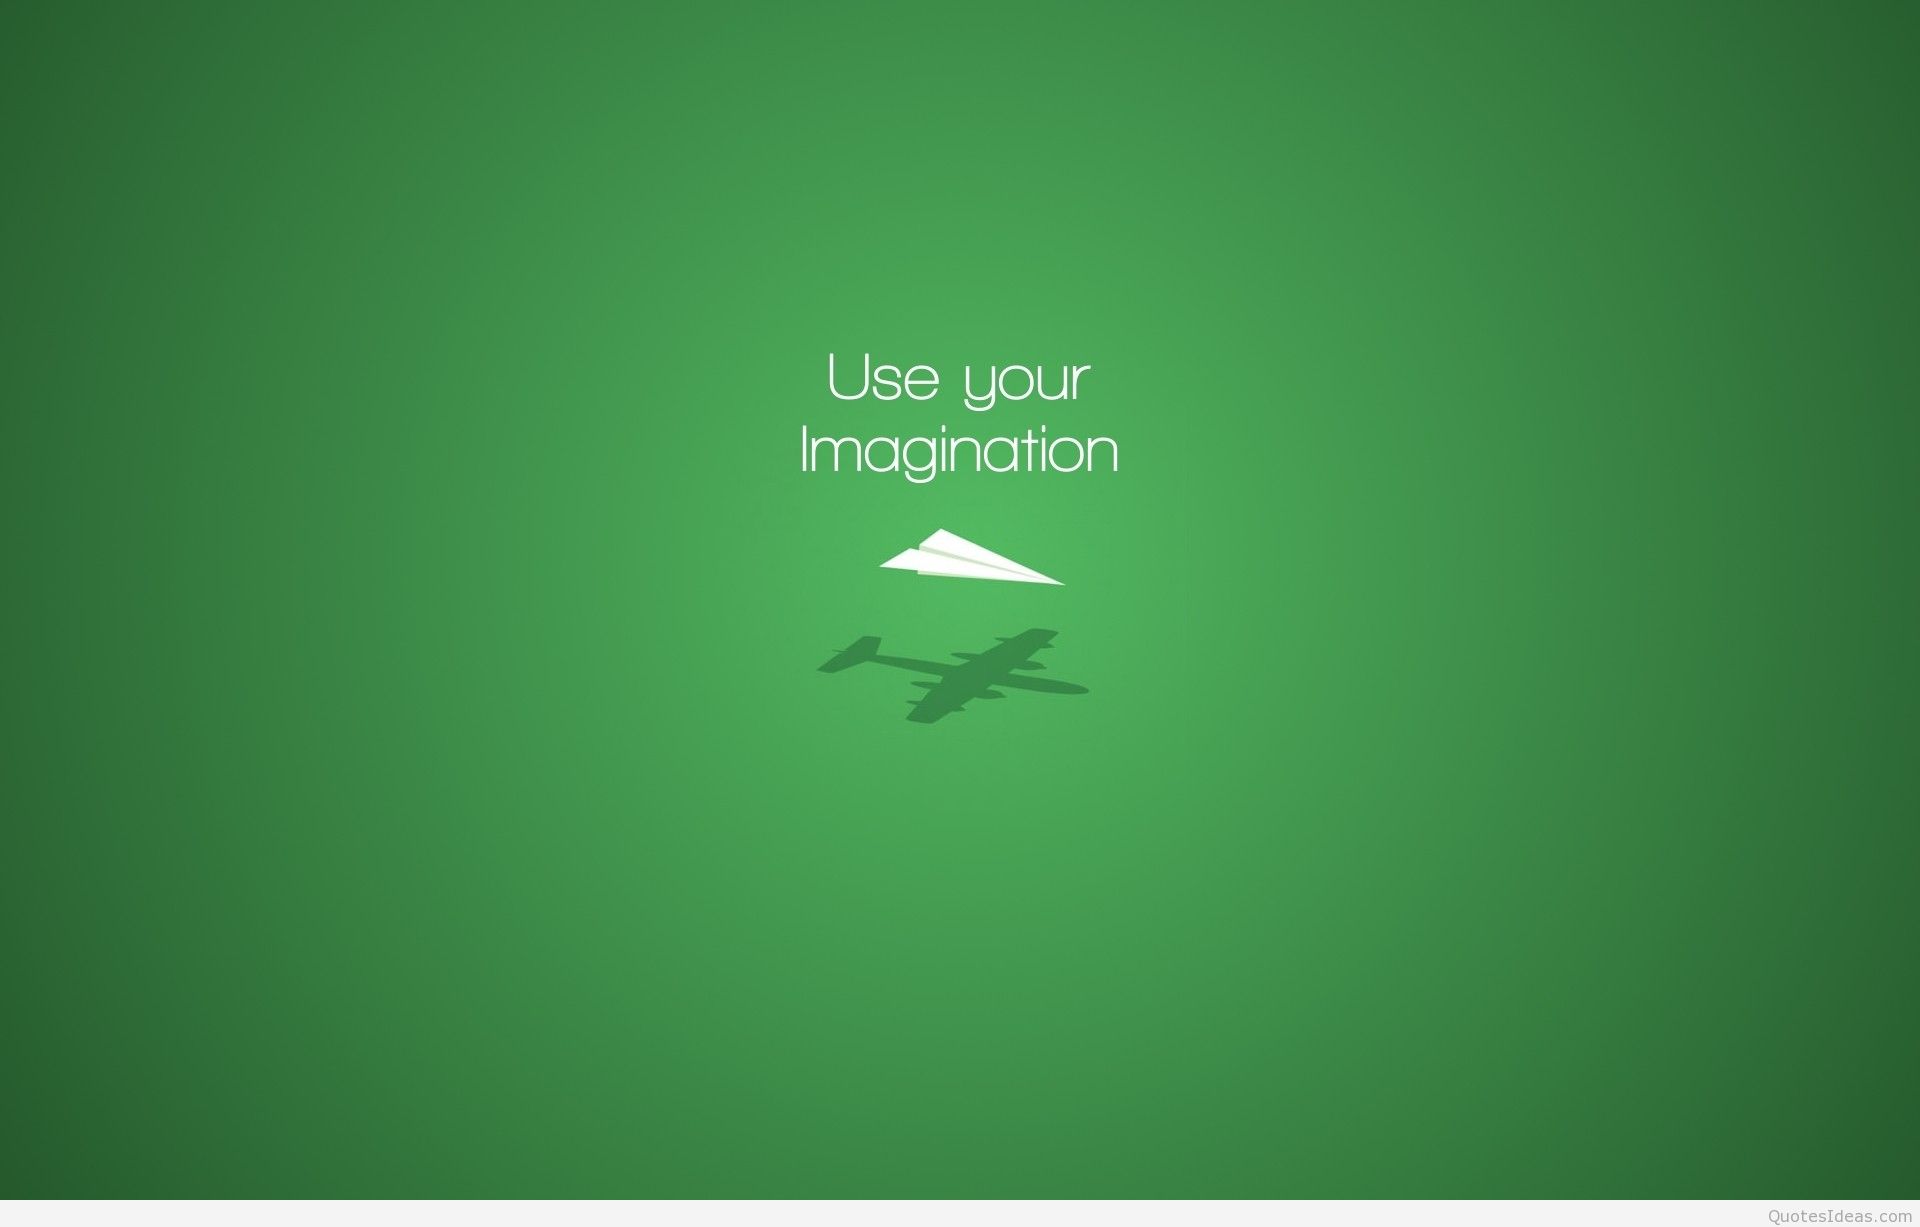 use your imagination.